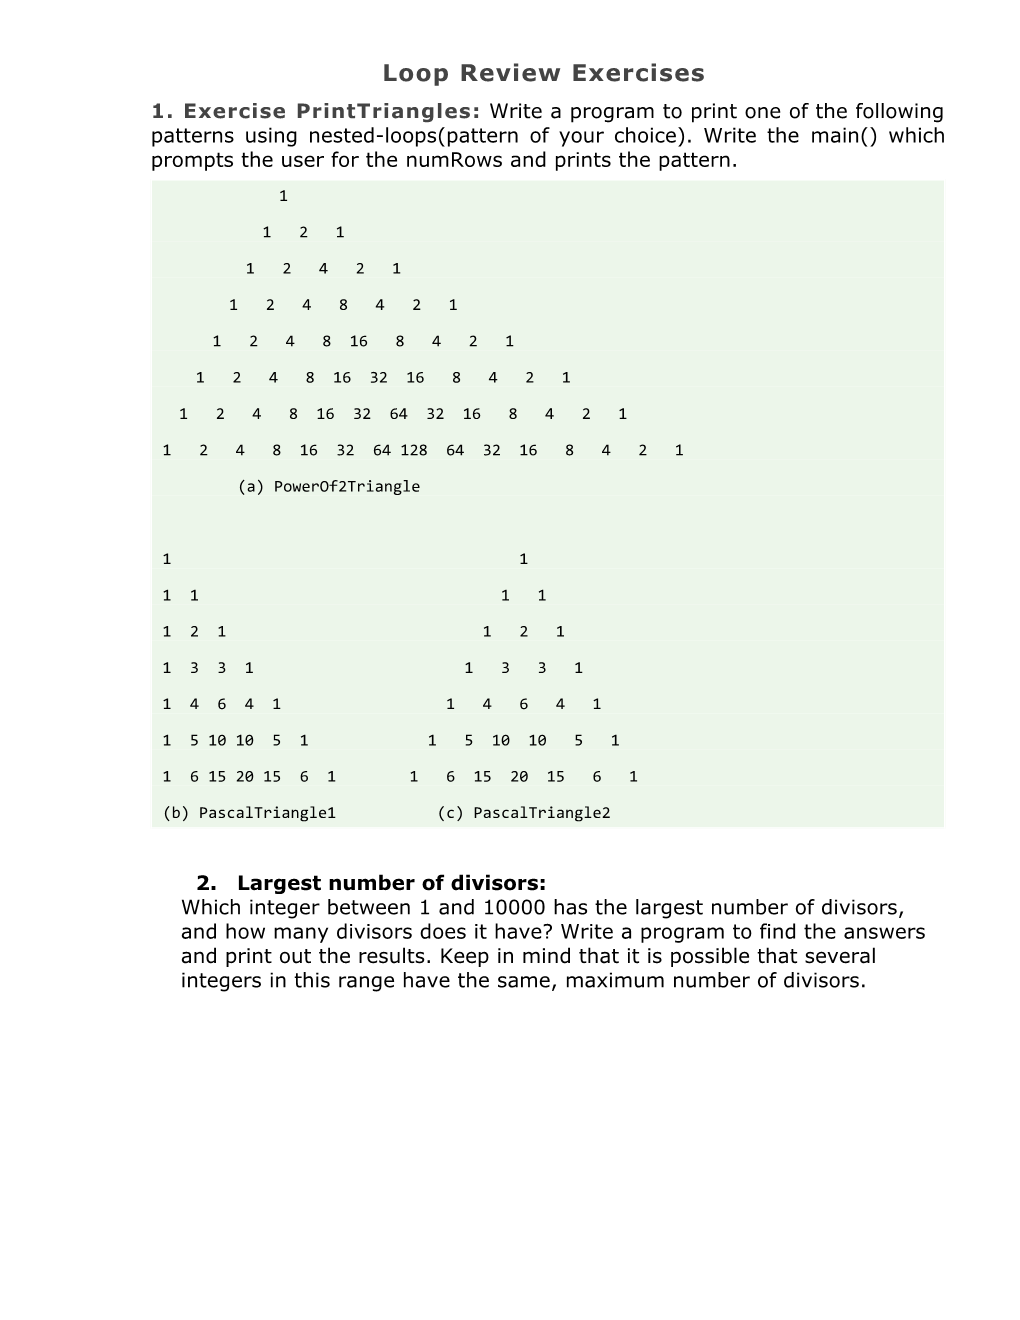 Exercise Printtriangles: Write a Method to Print Each of the Following Patterns Using